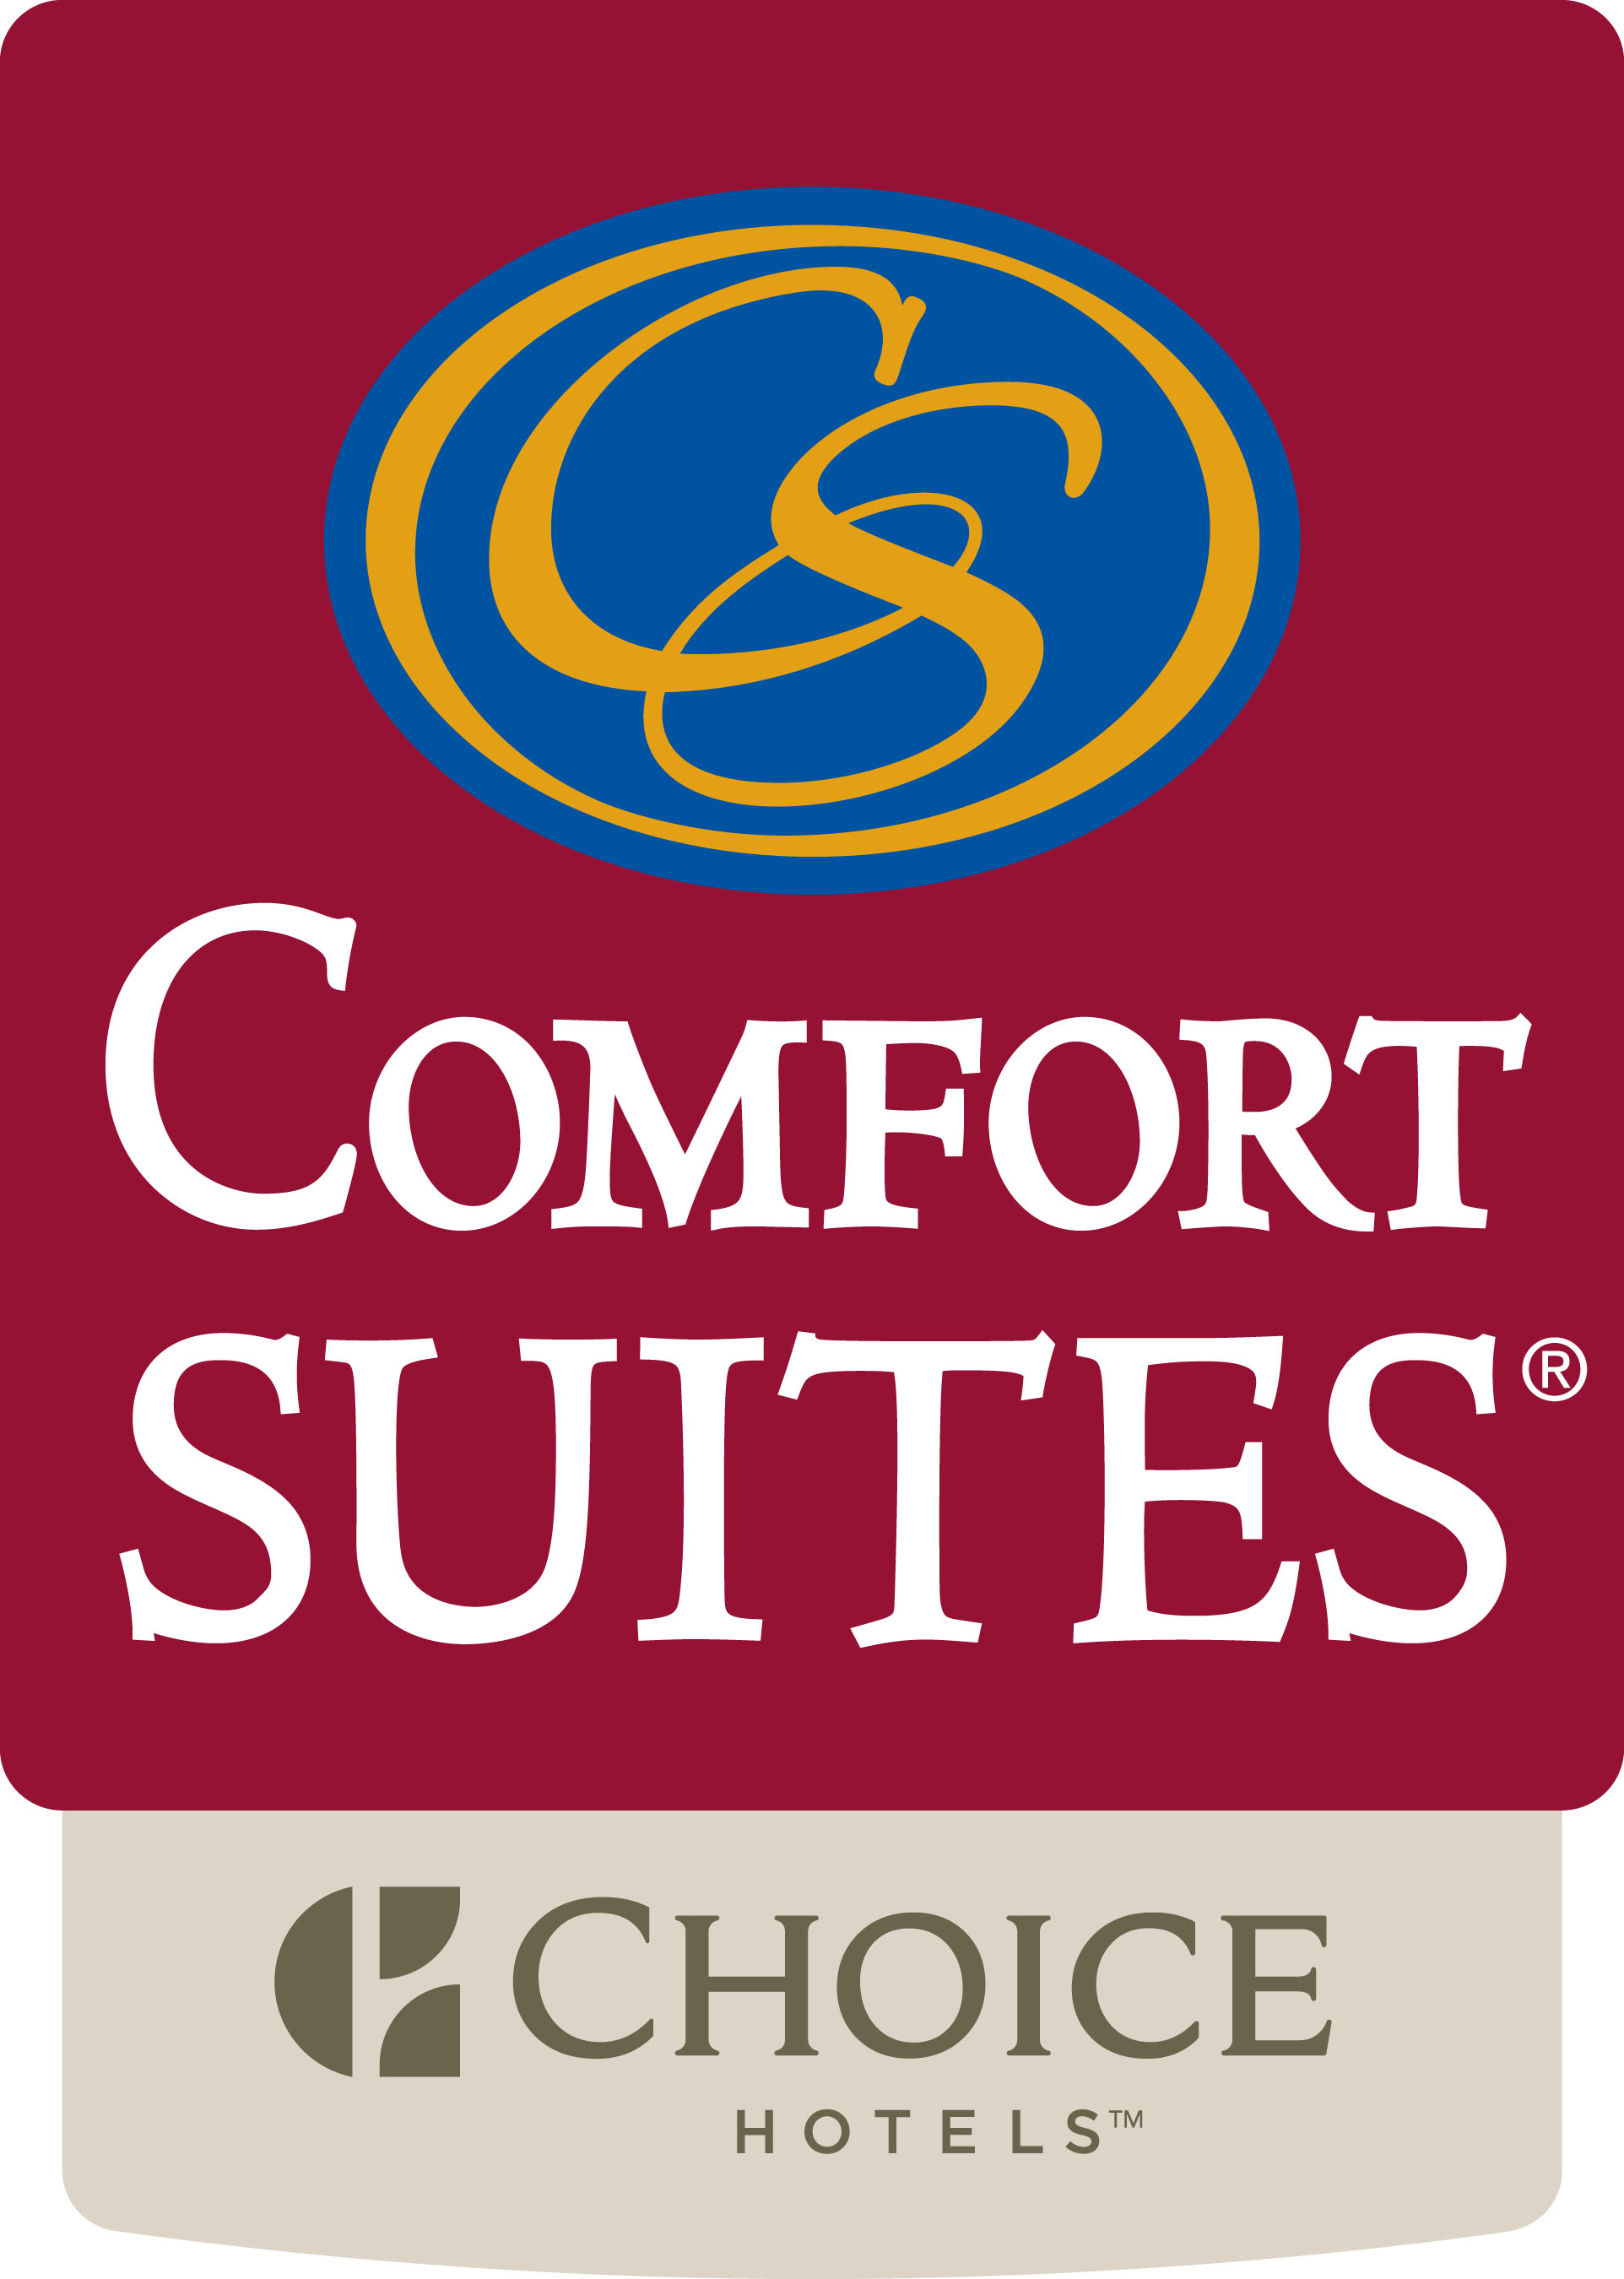 Comfort Suites by Choice Hotel